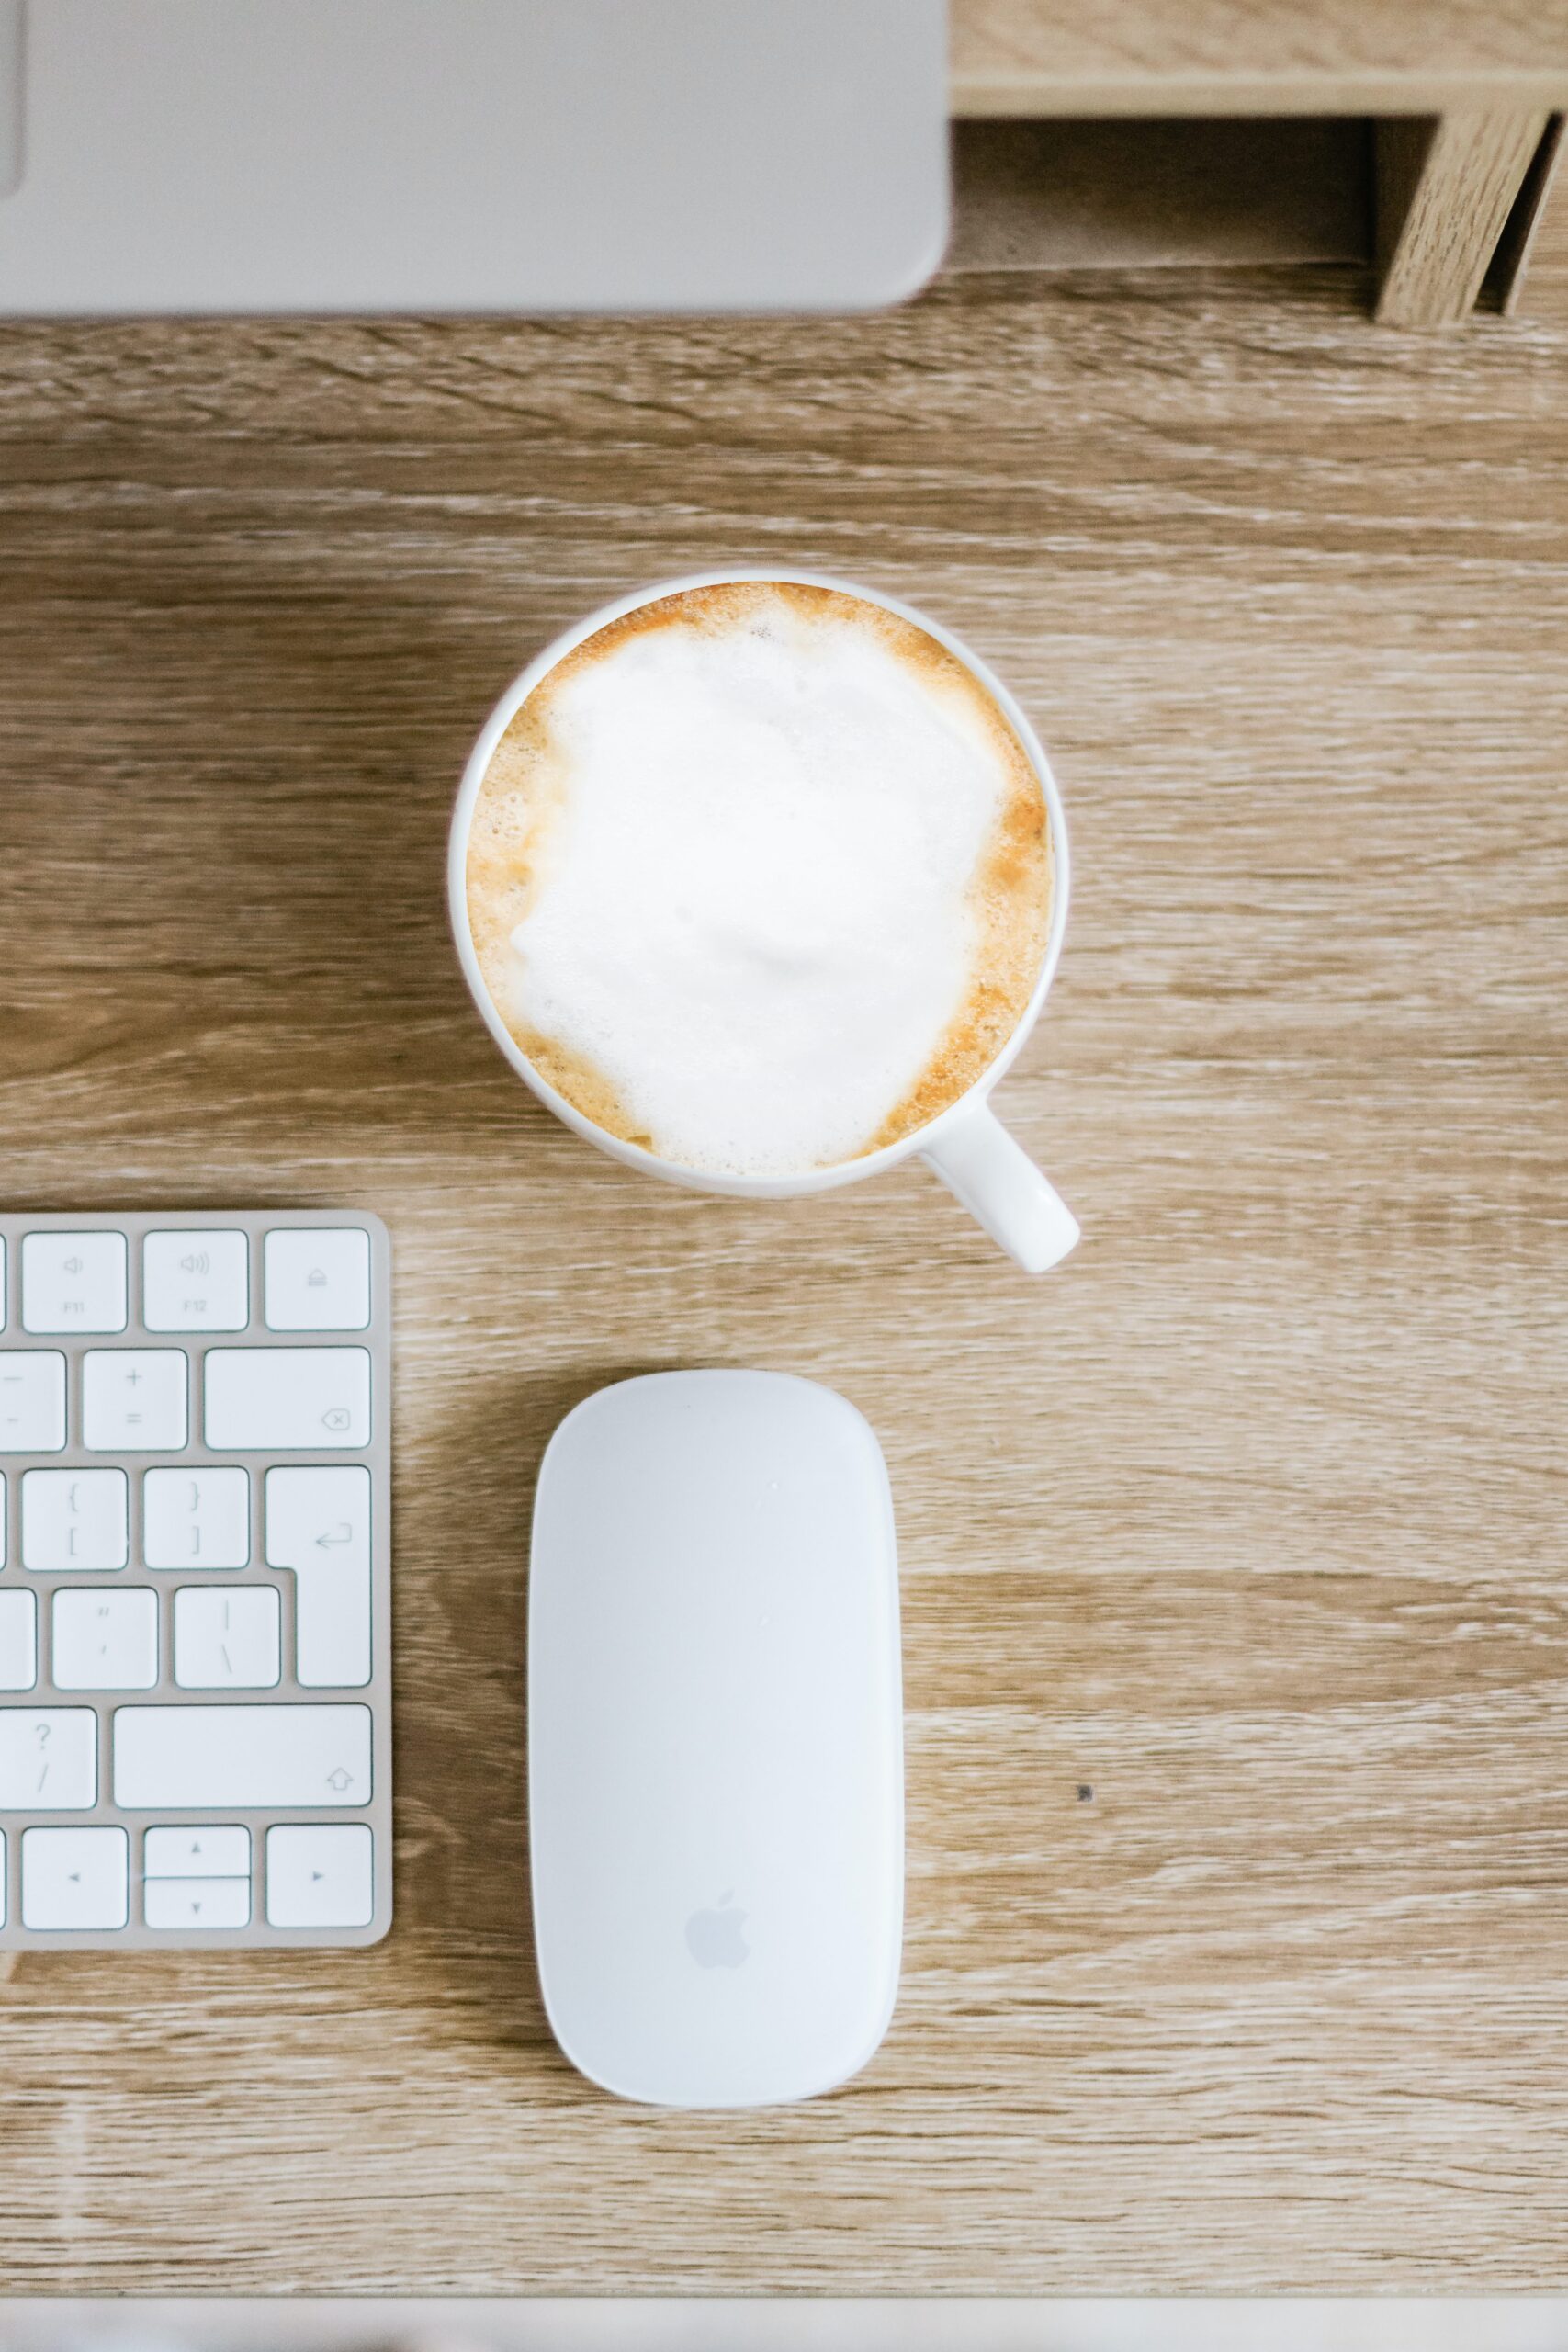 Keyboard with mouse and coffee